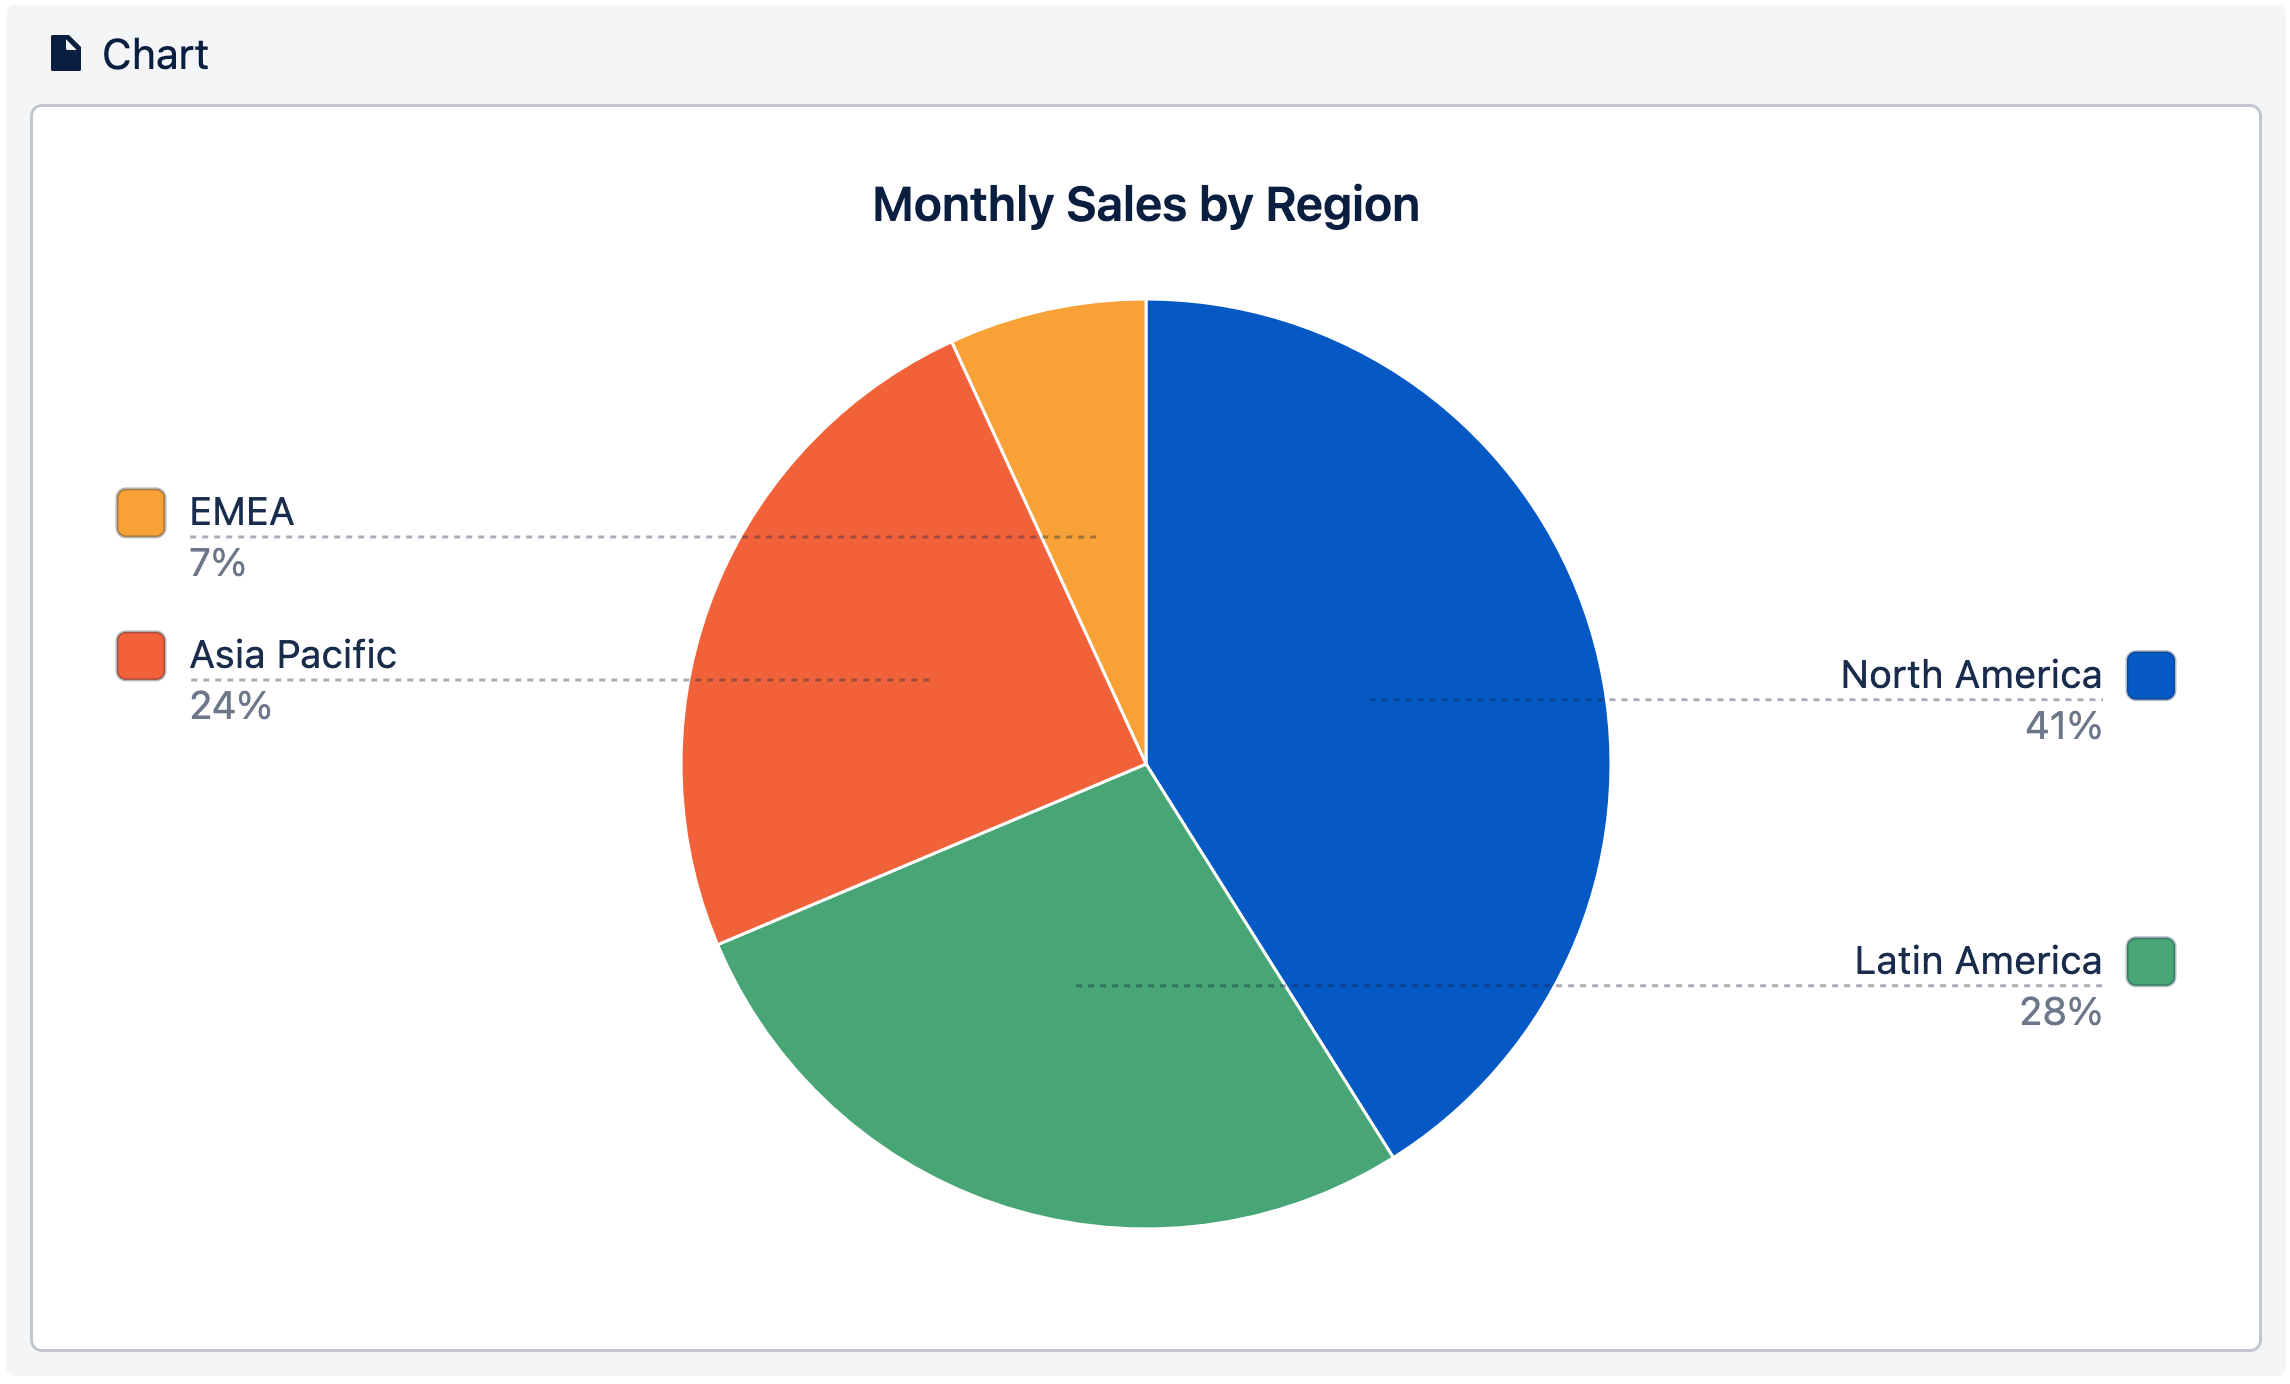 A pie chart showing the monthly sales by regions